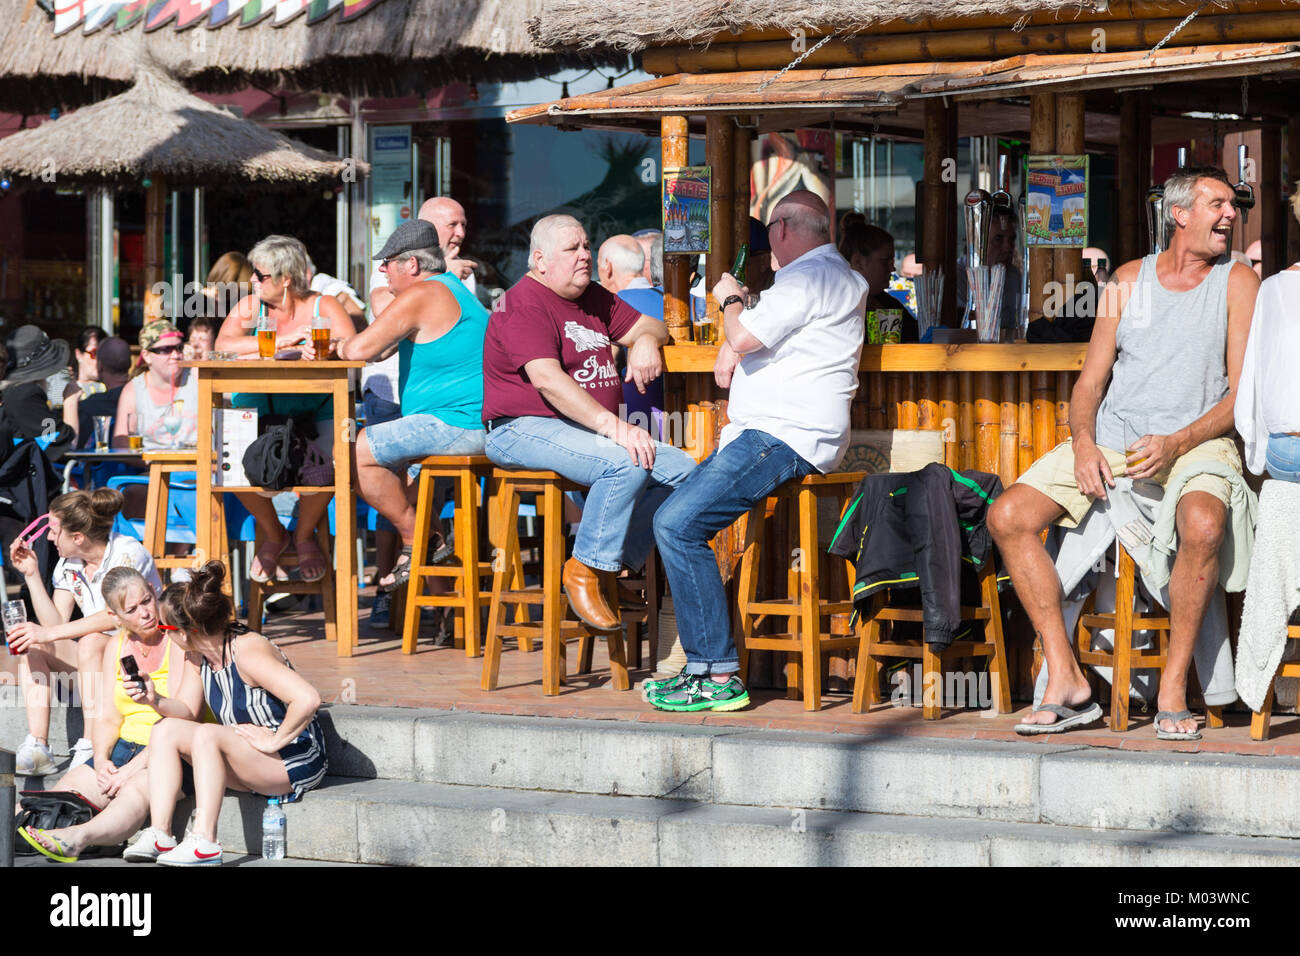 Levante Beach, Benidorm, Costa Blanca, Spain, 18 January 2018. British holidaymakers escape the cold weather in the UK. Tourists and locals enjoy the winter sun and daytime temperatures in the high 20's Celsius at the beachfront Tiki Bar. Credit: Mick Flynn/Alamy Live News Stock Photo